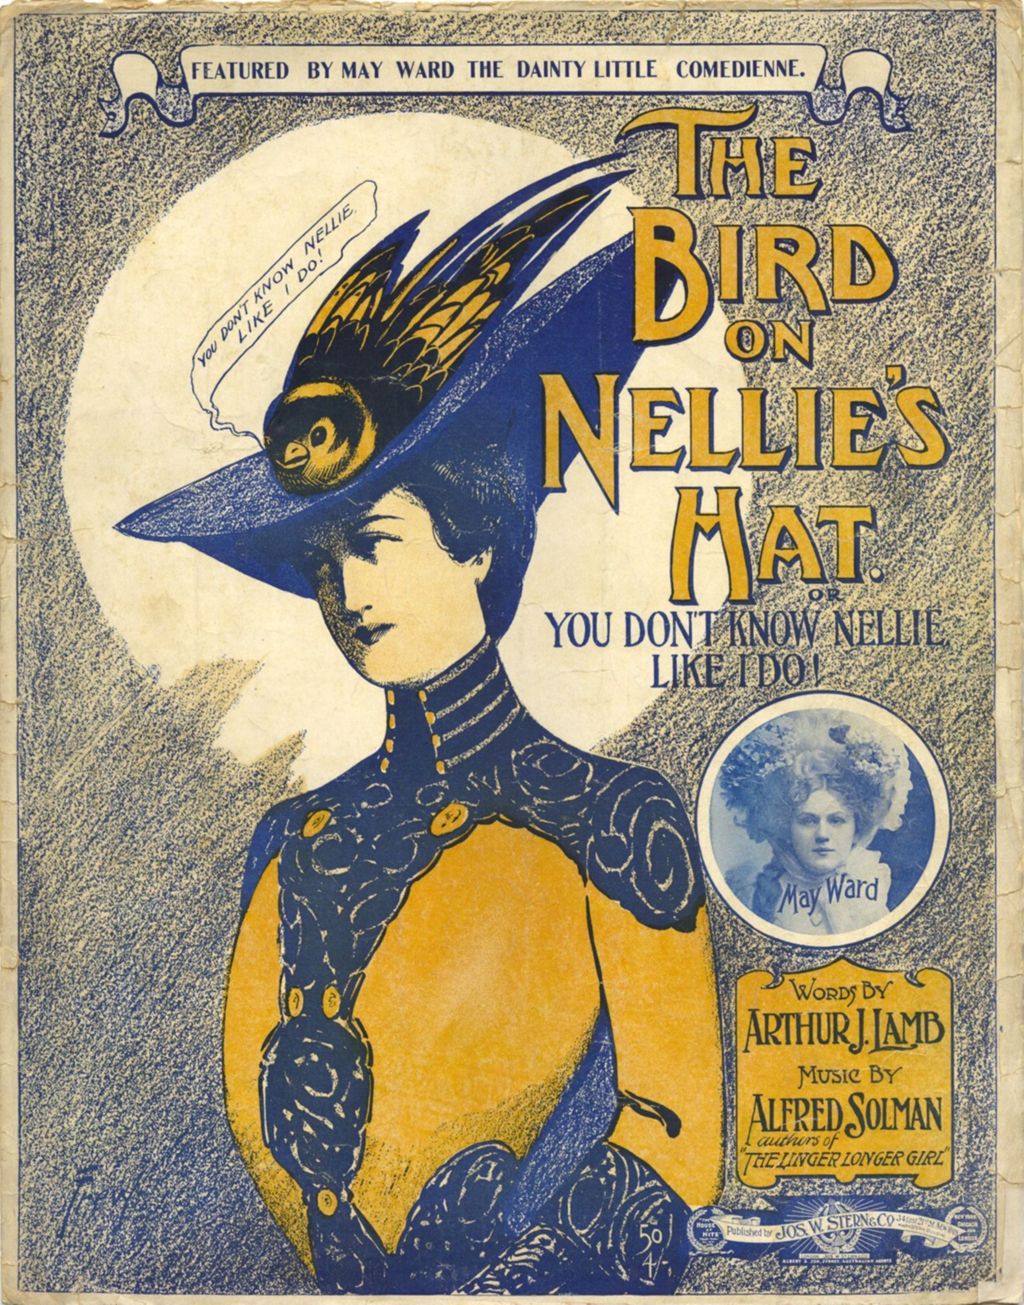 Miniature of Bird on Nellie's Hat (You Don't Know Nellie Like I Do!)